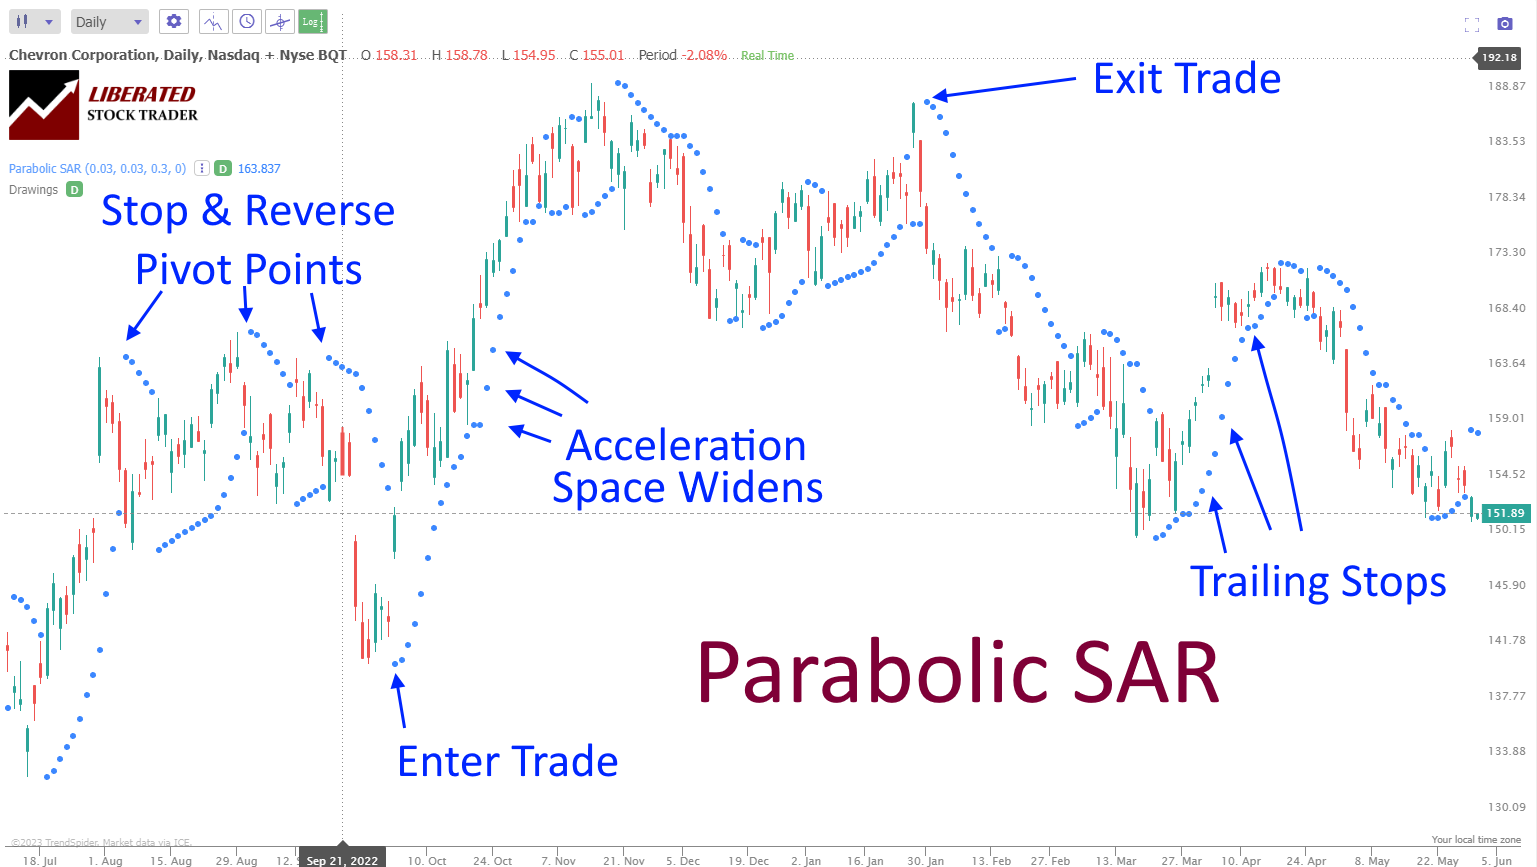 Understanding Parabolic SAR - Buy, Sell, Acceleration, Pivots, Stop & Reverse & Trailing Stops.